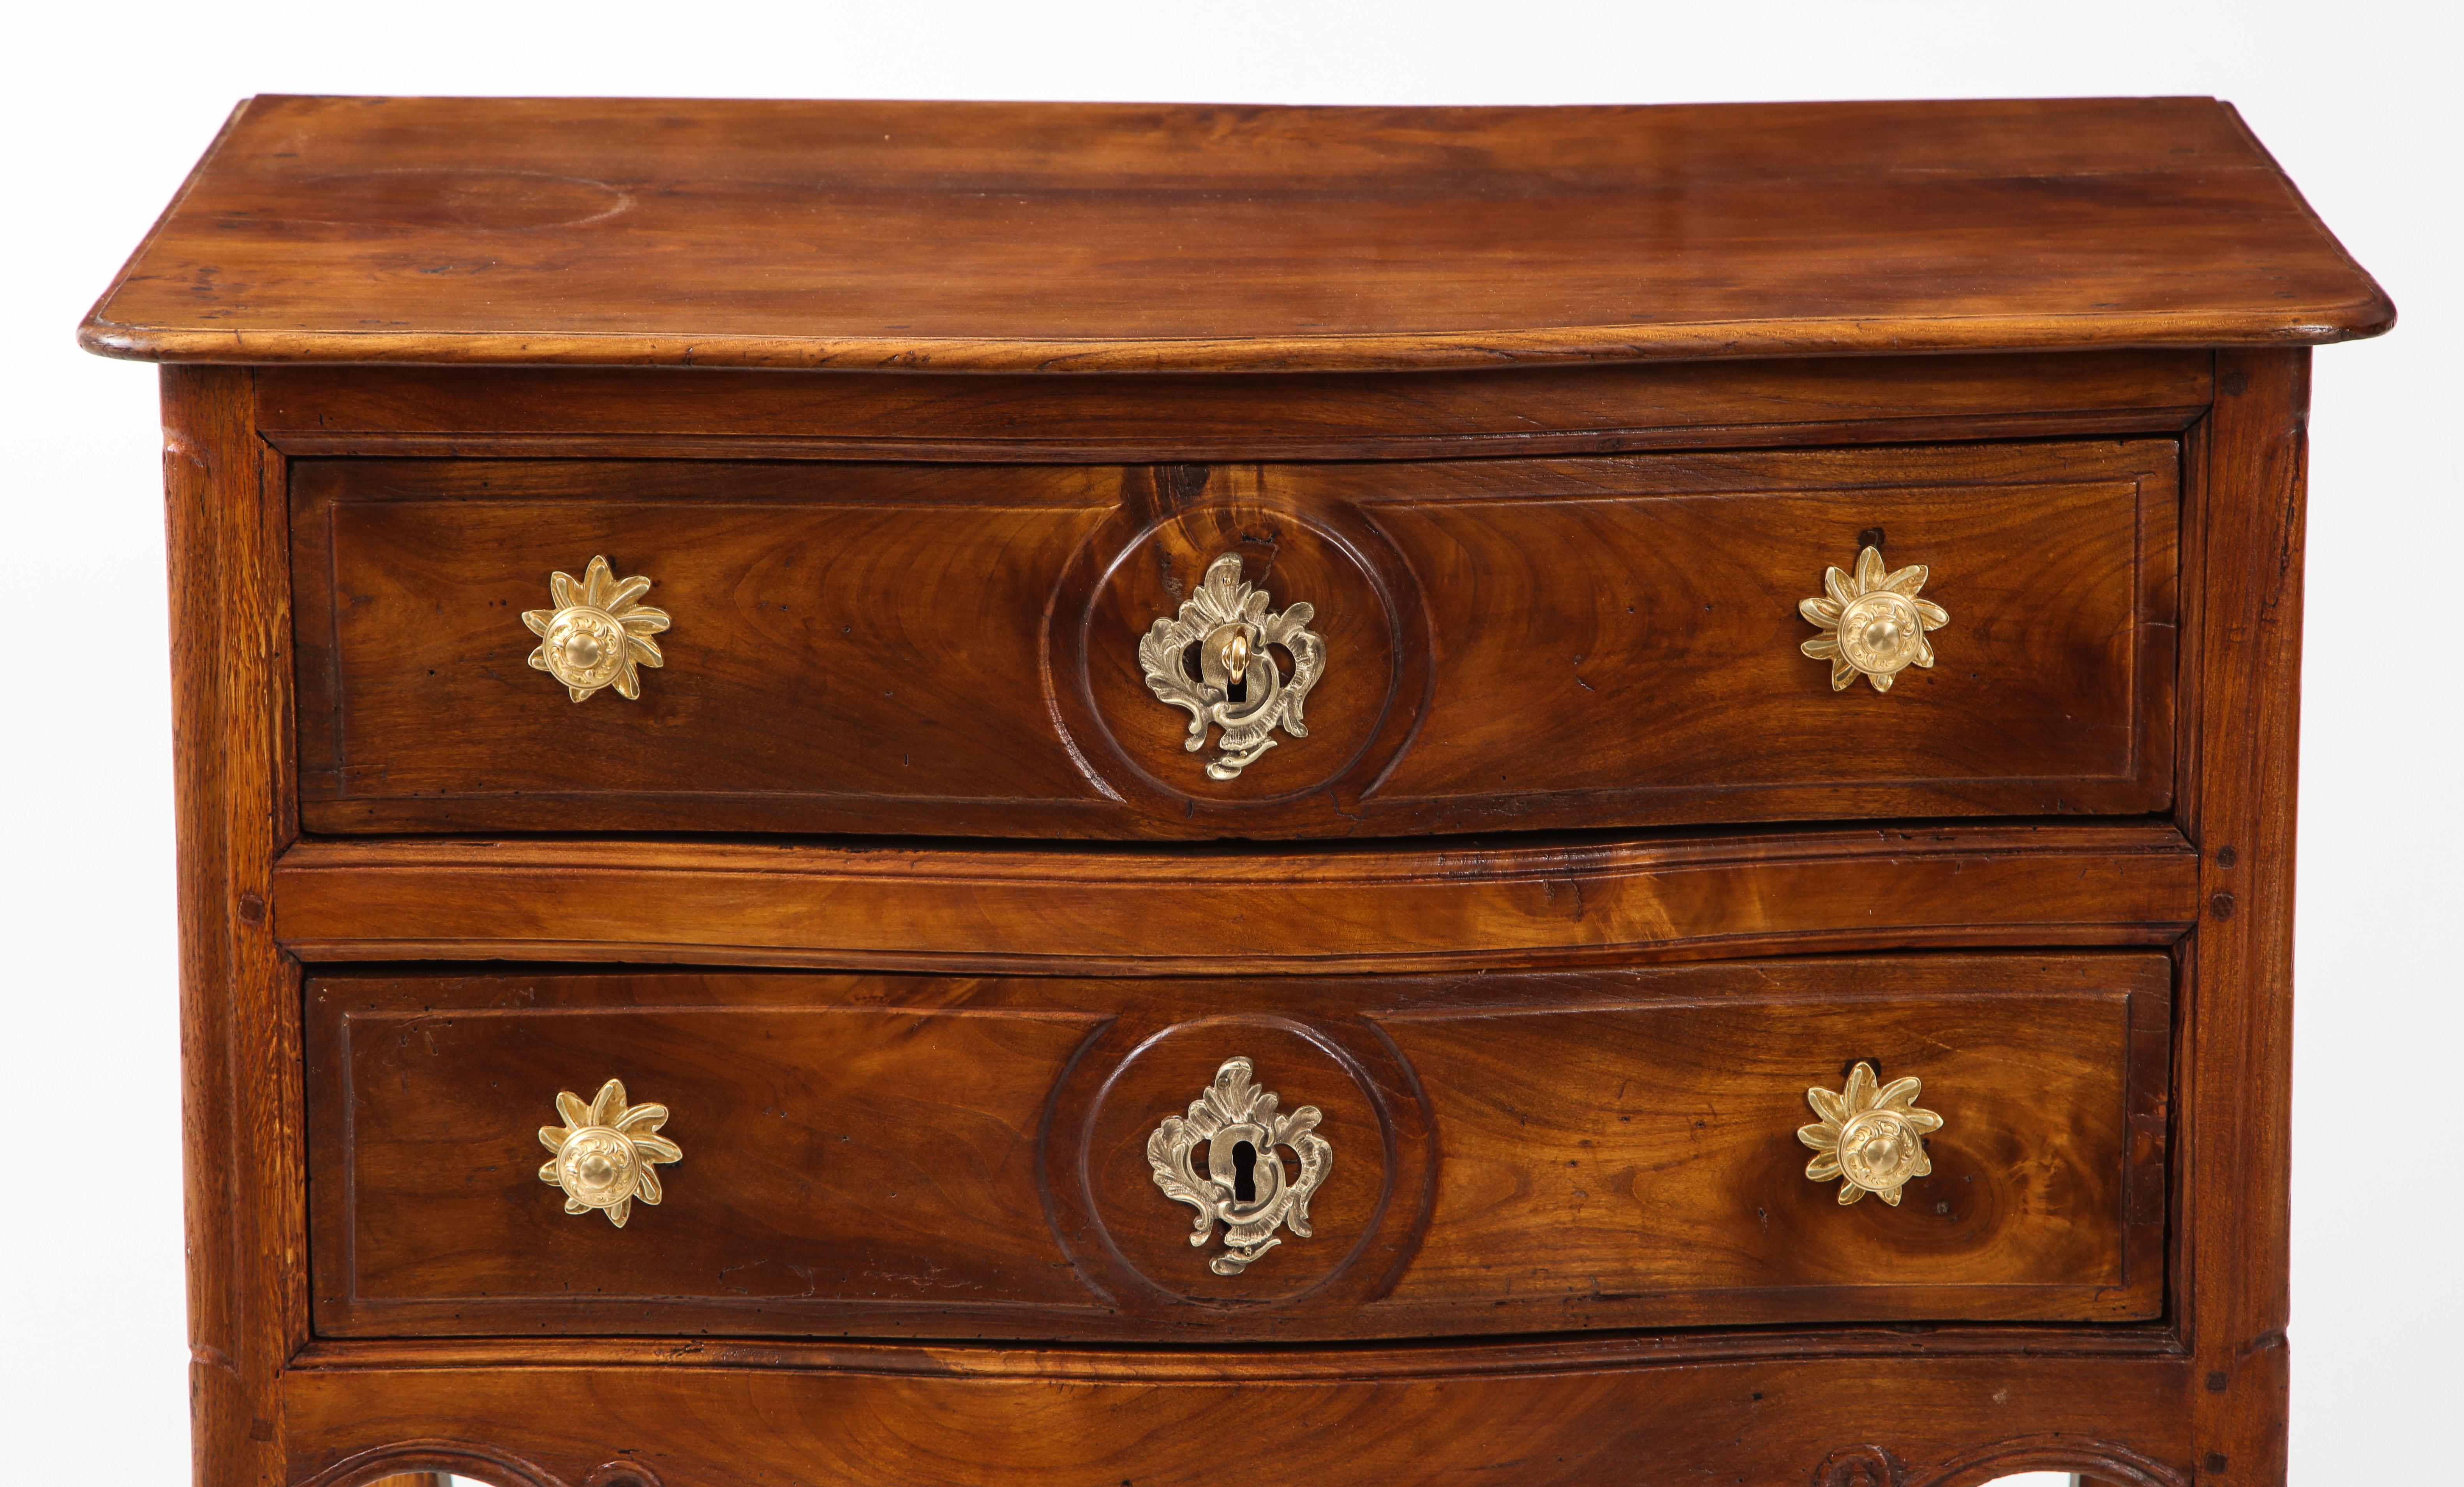 This little walnut commode oozes with elegance and charm. This sweet piece in solid walnut is from the Louis XV period, circa 1750. If features two drawers with original gilt bronze hardware and a scalloped apron, raised on cabriole legs. Its small